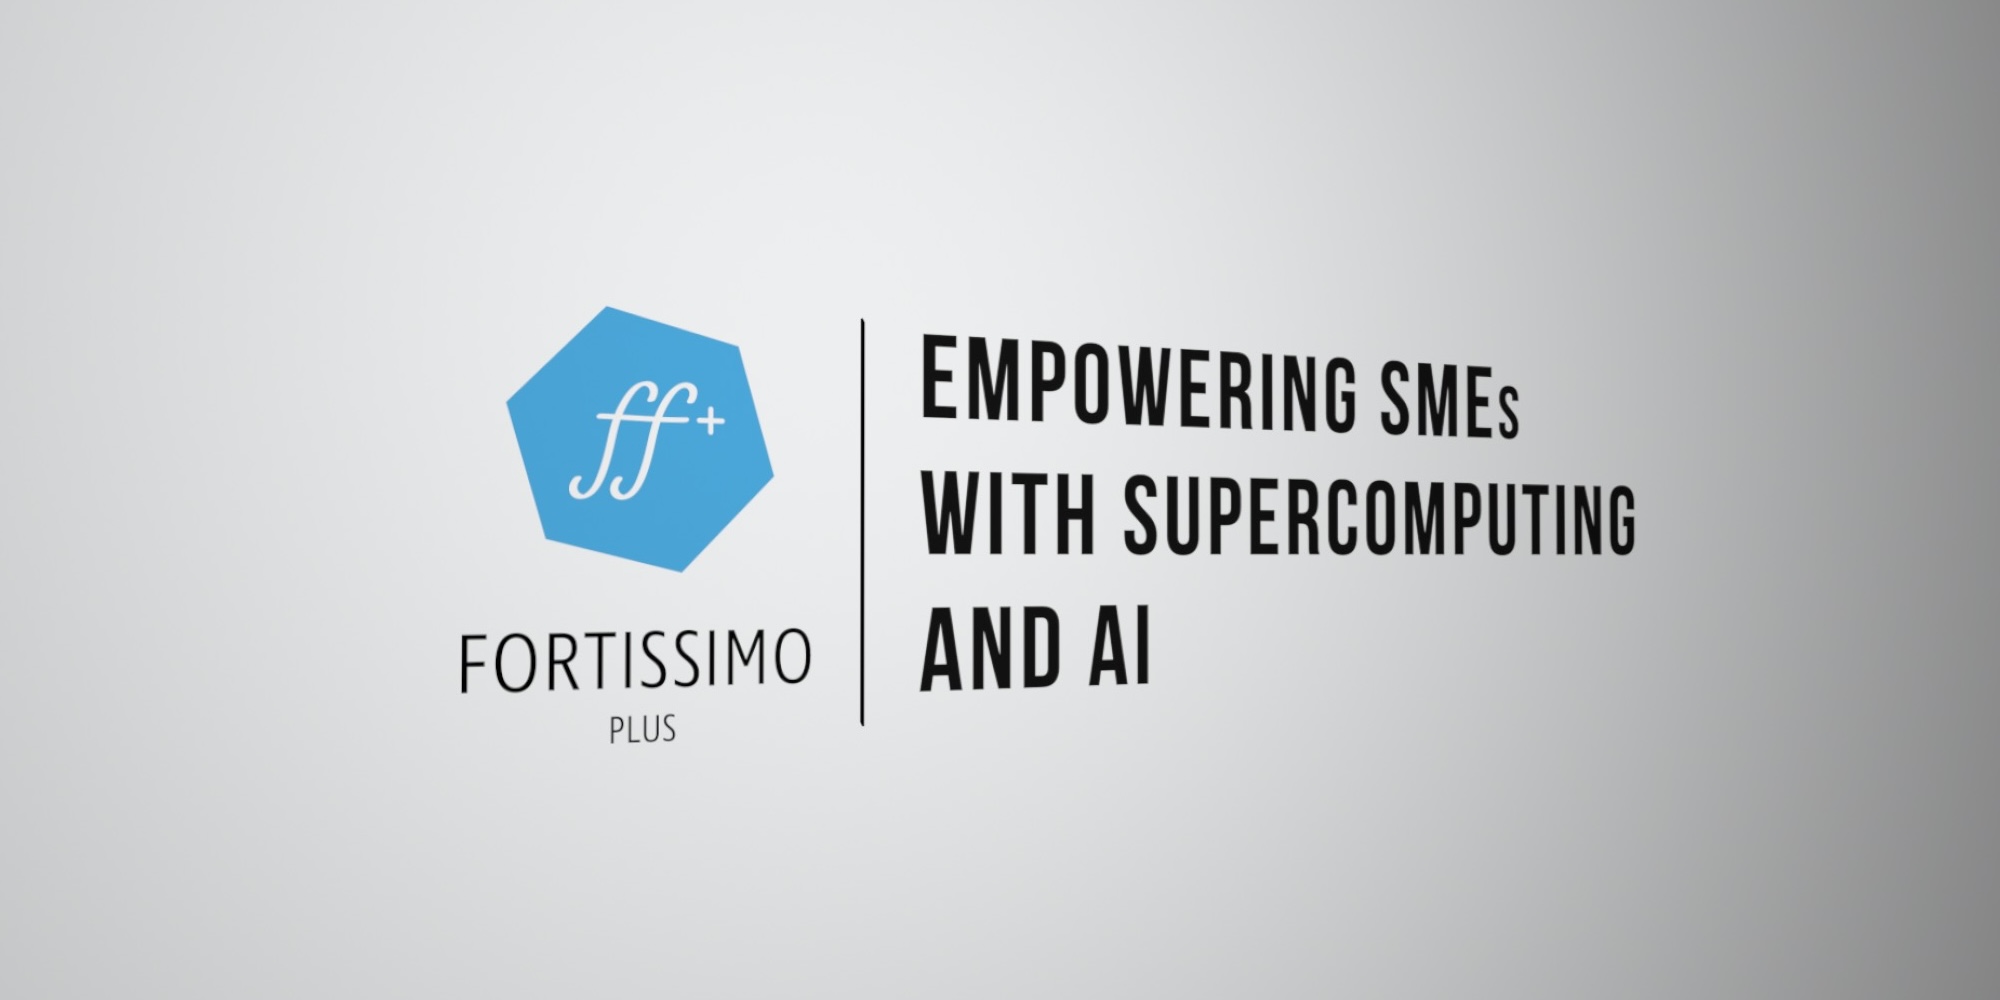 FFPlus logo next to the title "Empowering SMEs with Supercomputing and AI"